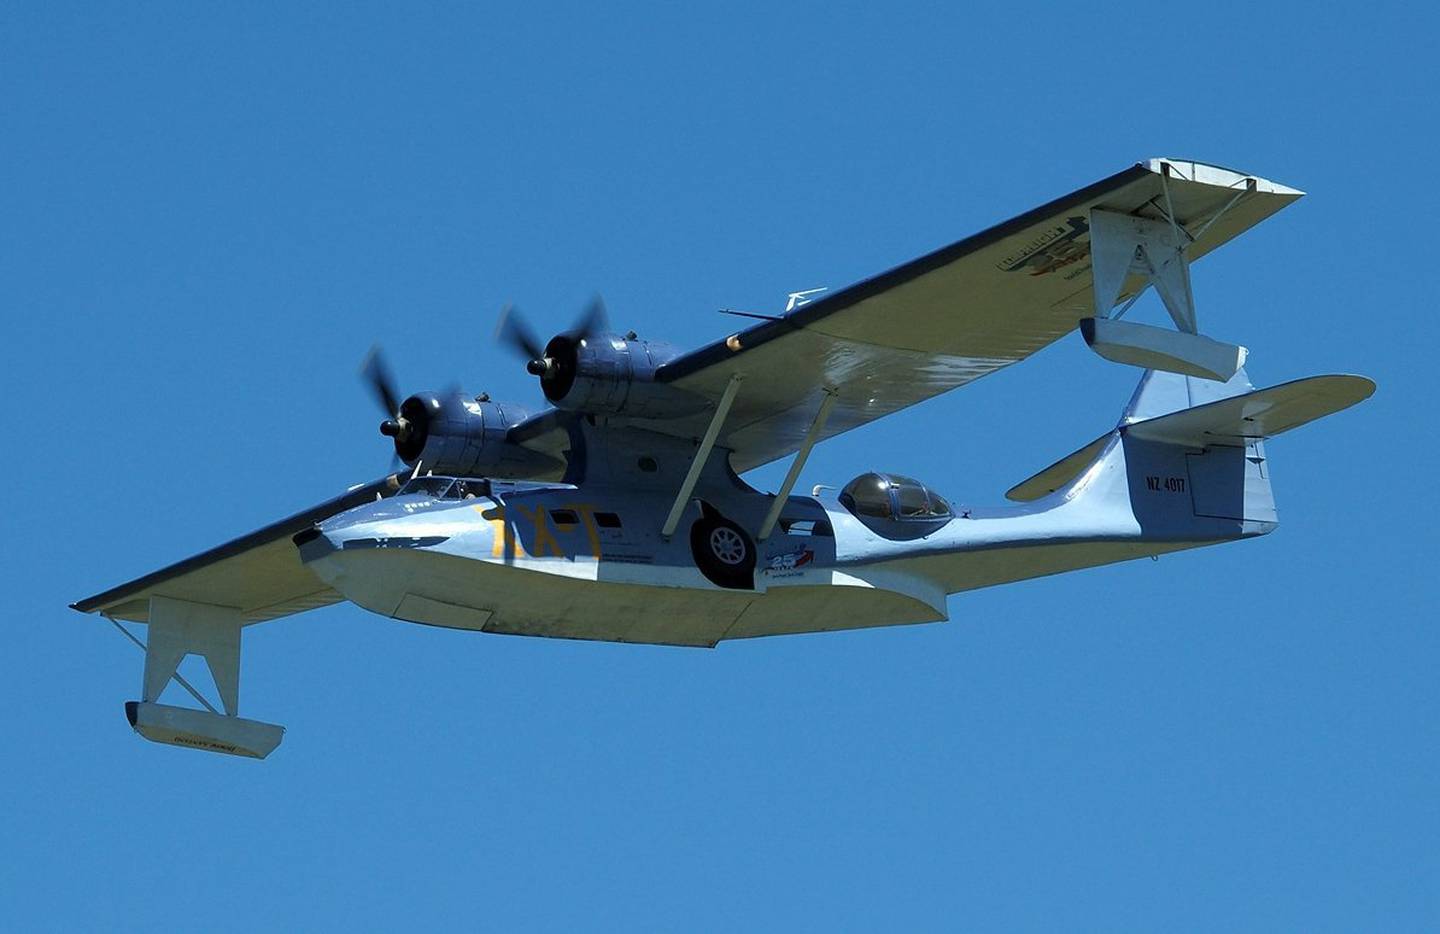 Neill Boak flew a Catalina flying boat during WWII. Photo: File